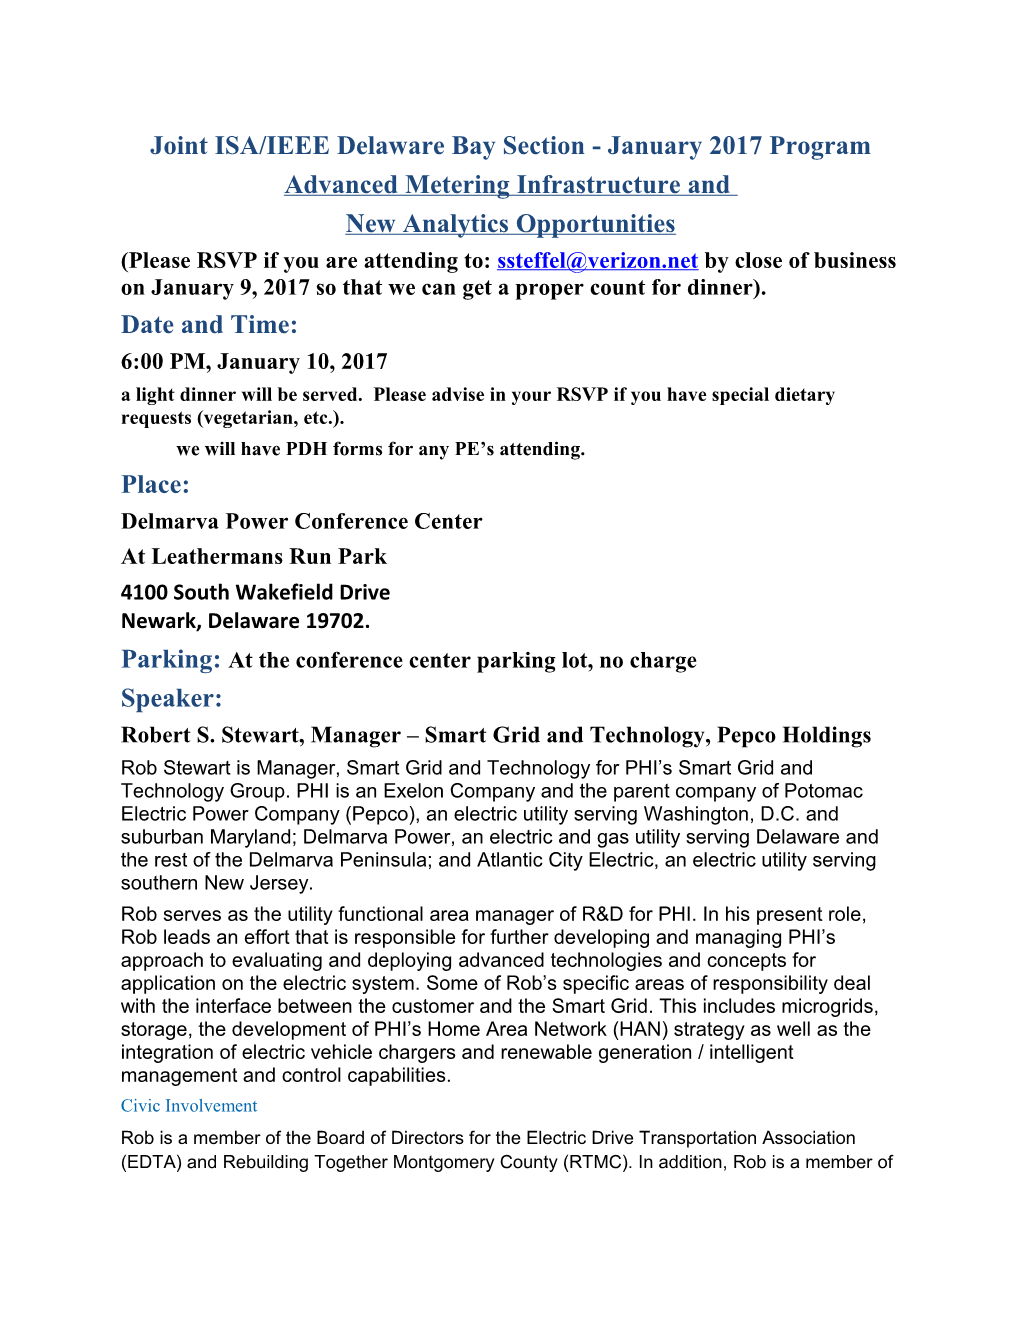 Joint ISA/IEEE Delaware Bay Section - January 2017 Program